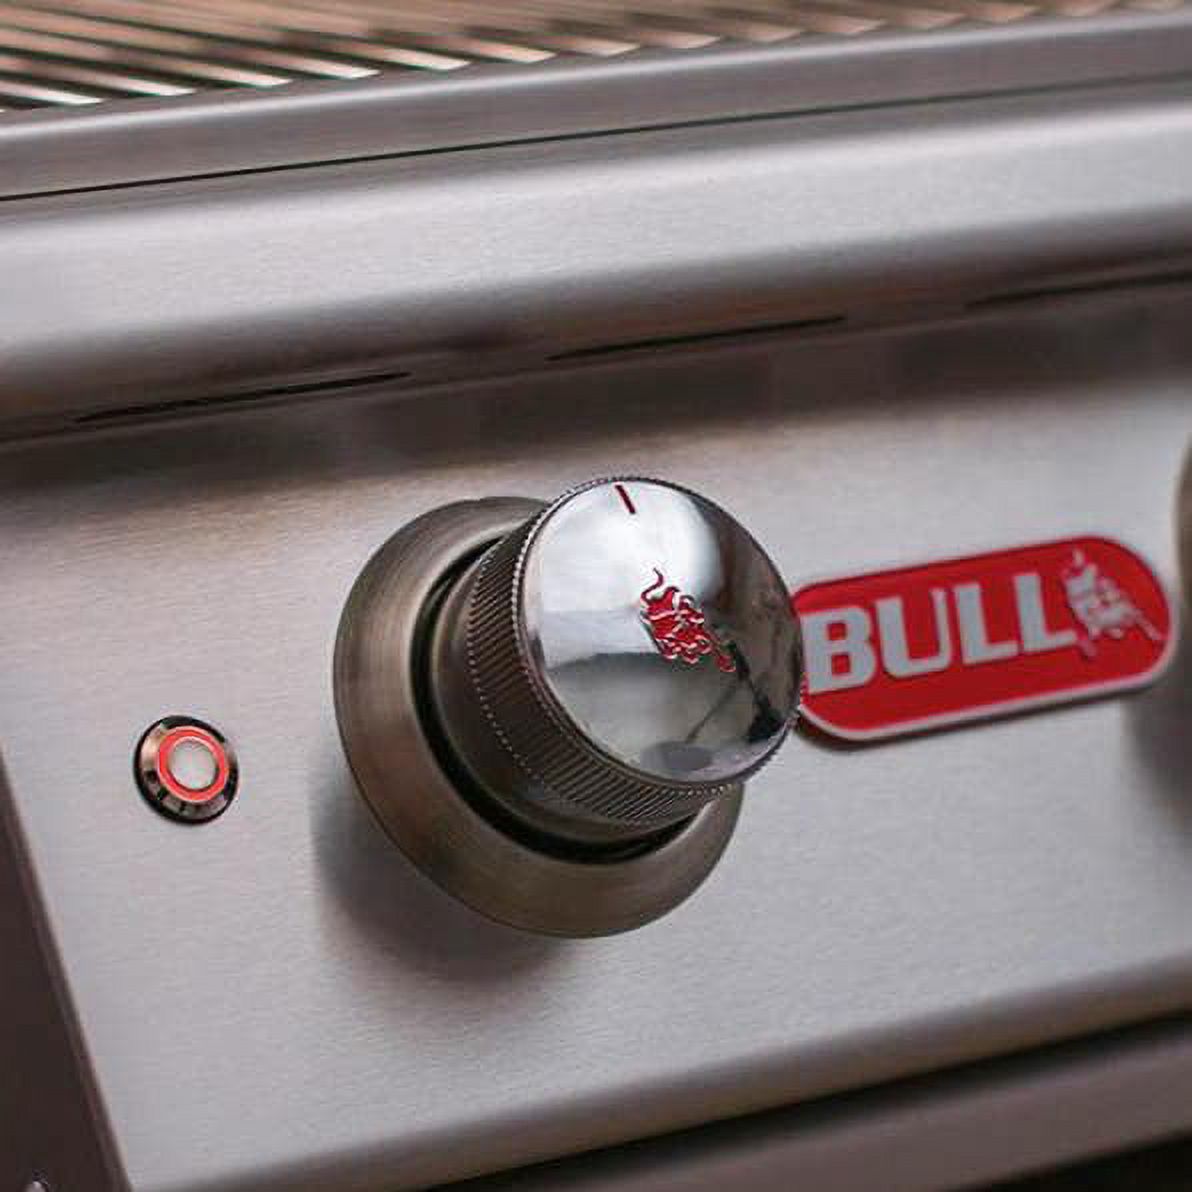 Bull Lonestar 4 Burner 30'' Stainless Steel Gas Barbecue Grill Head, Natural Gas - image 3 of 3